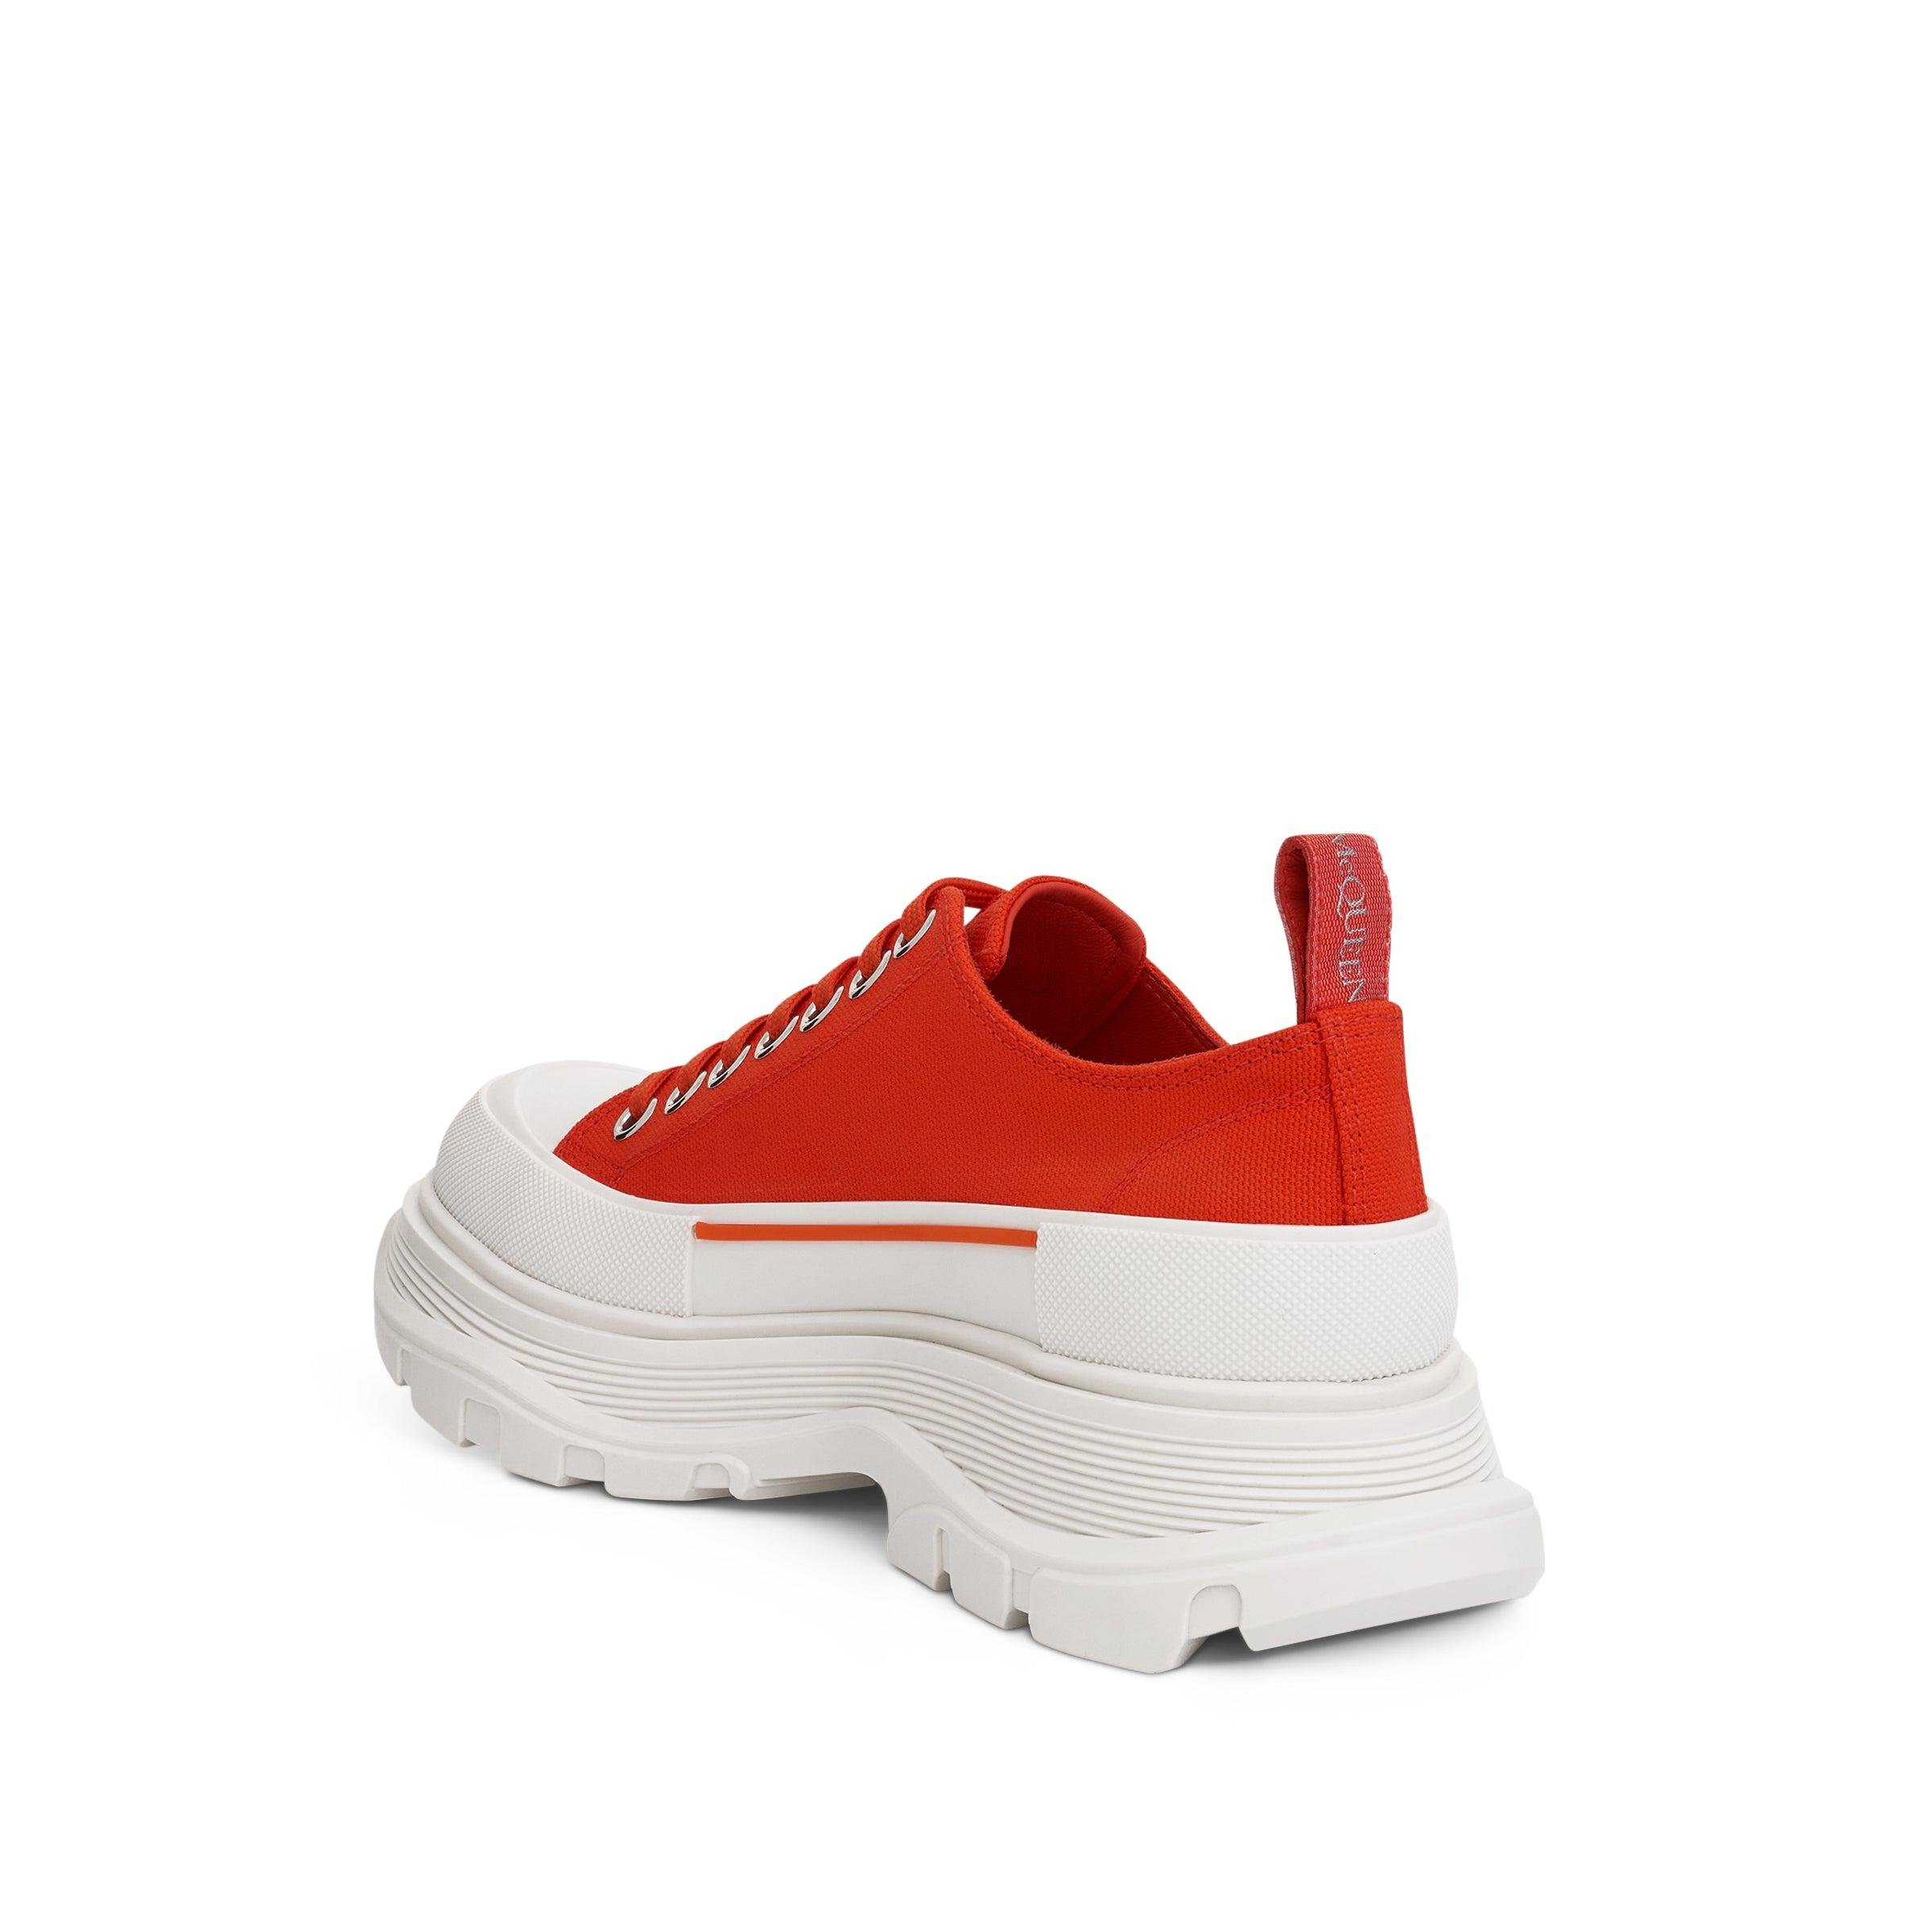 Alexander McQueen Tread Slick Canvas Lace-up Shoes In Orange/white in Red |  Lyst